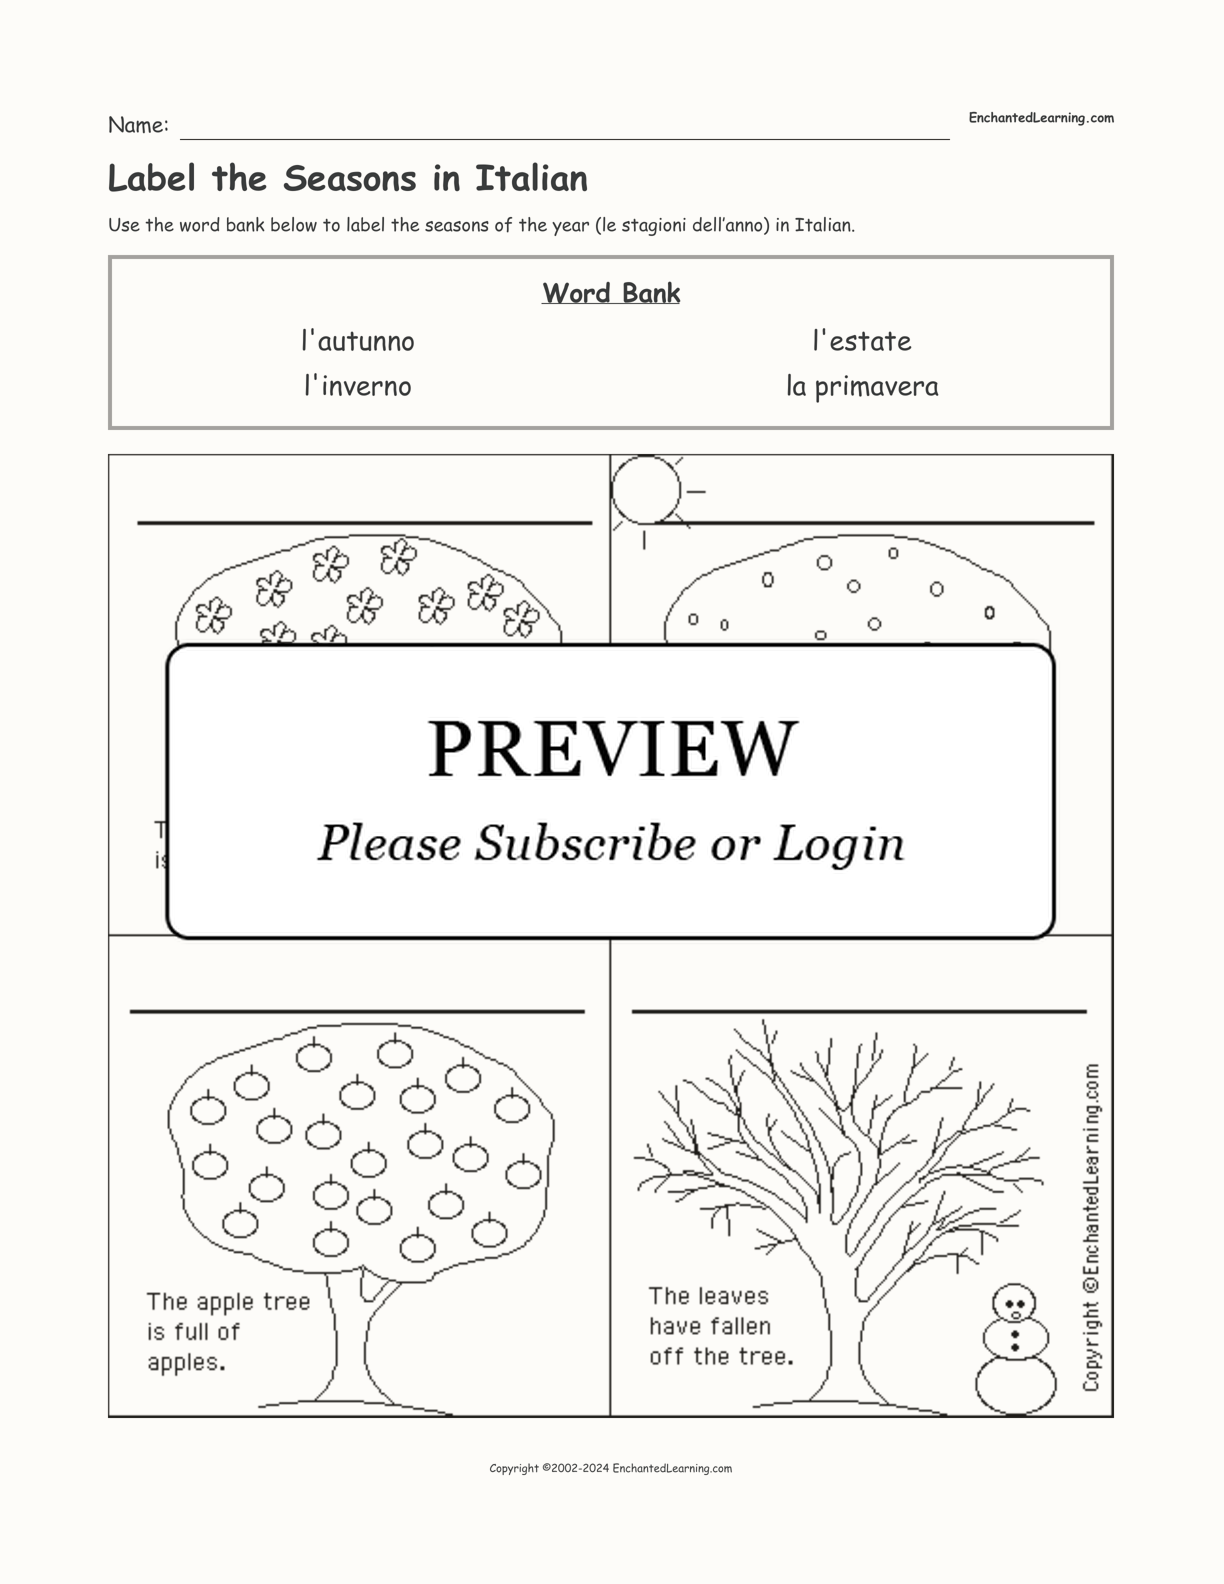 Label the Seasons in Italian interactive worksheet page 1